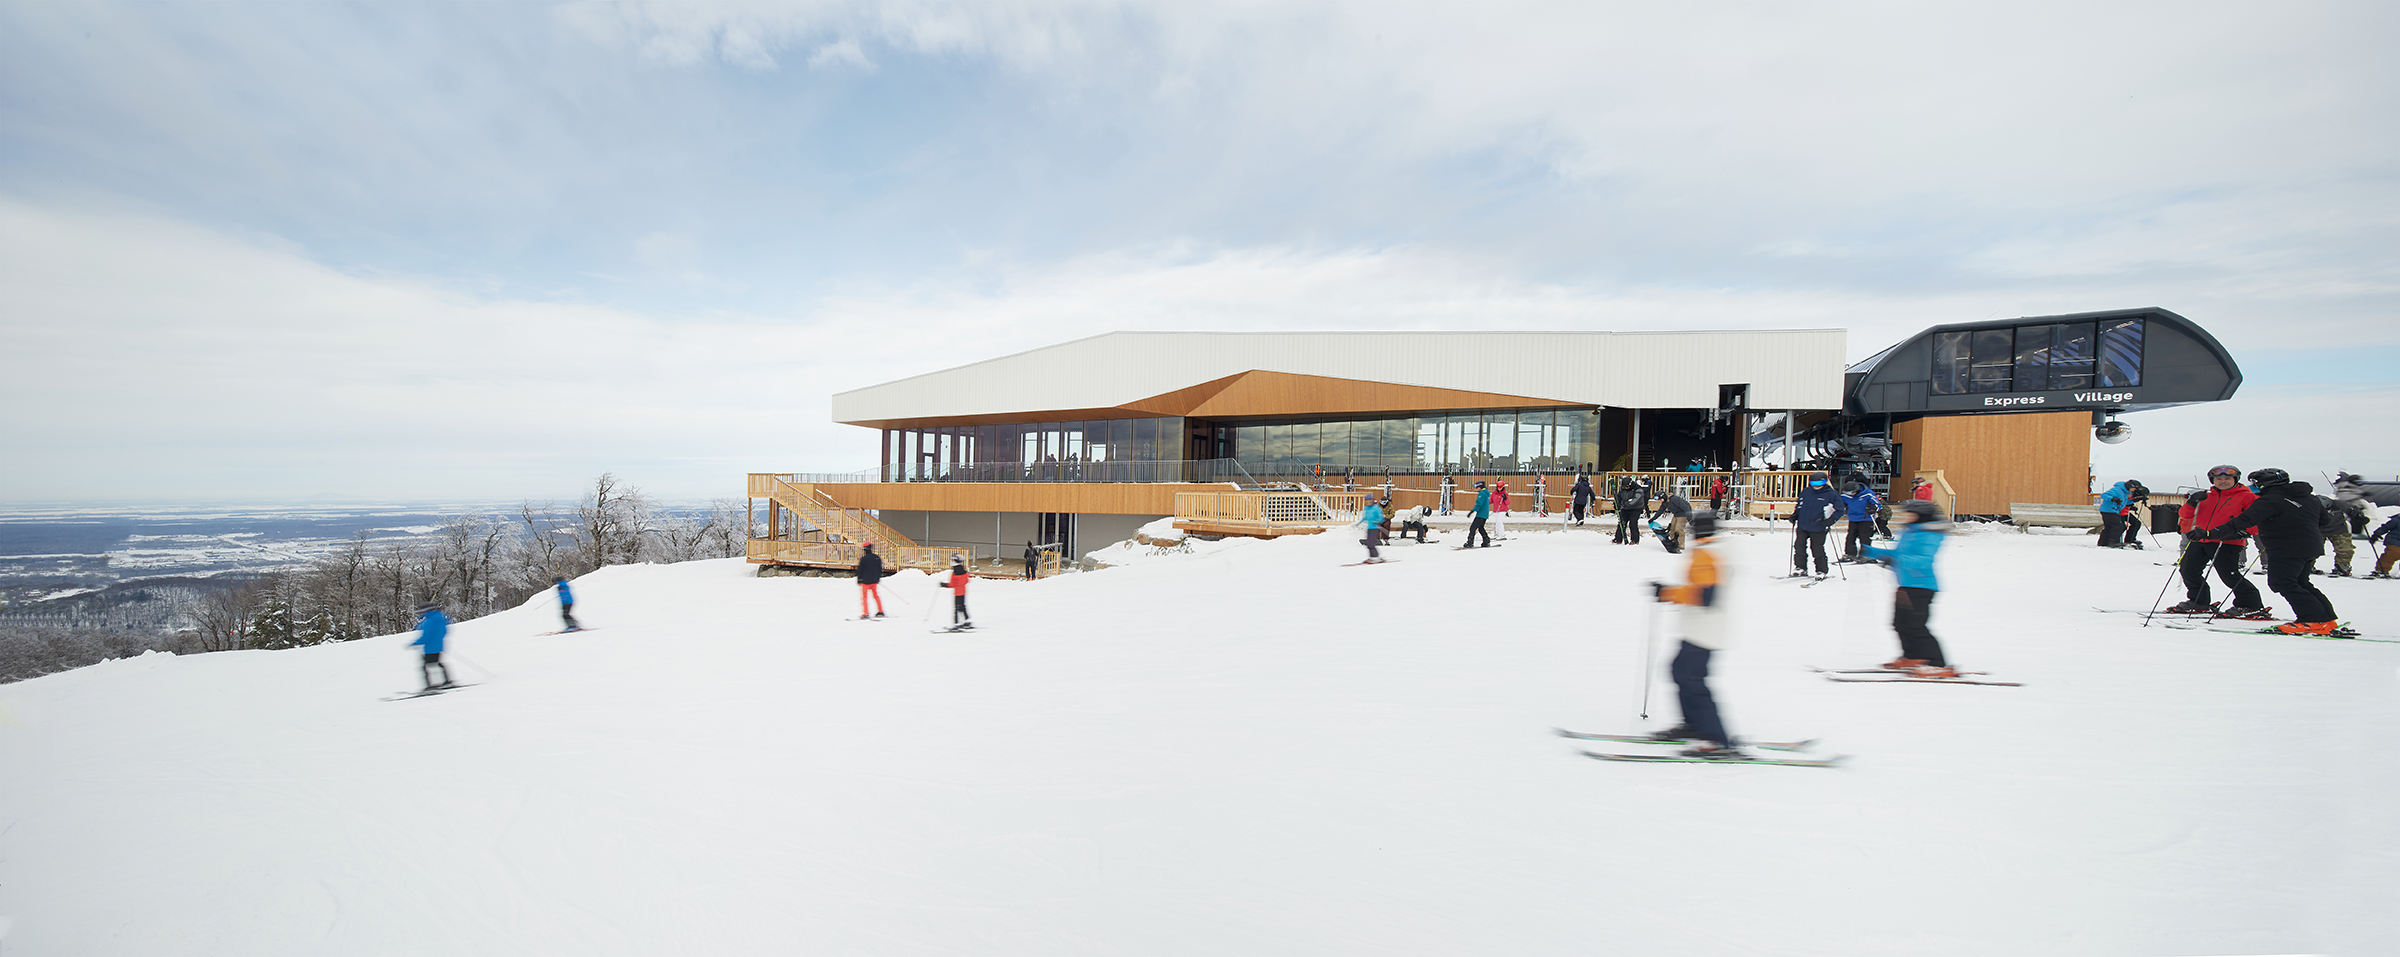 People on a ski slope with chalet behind